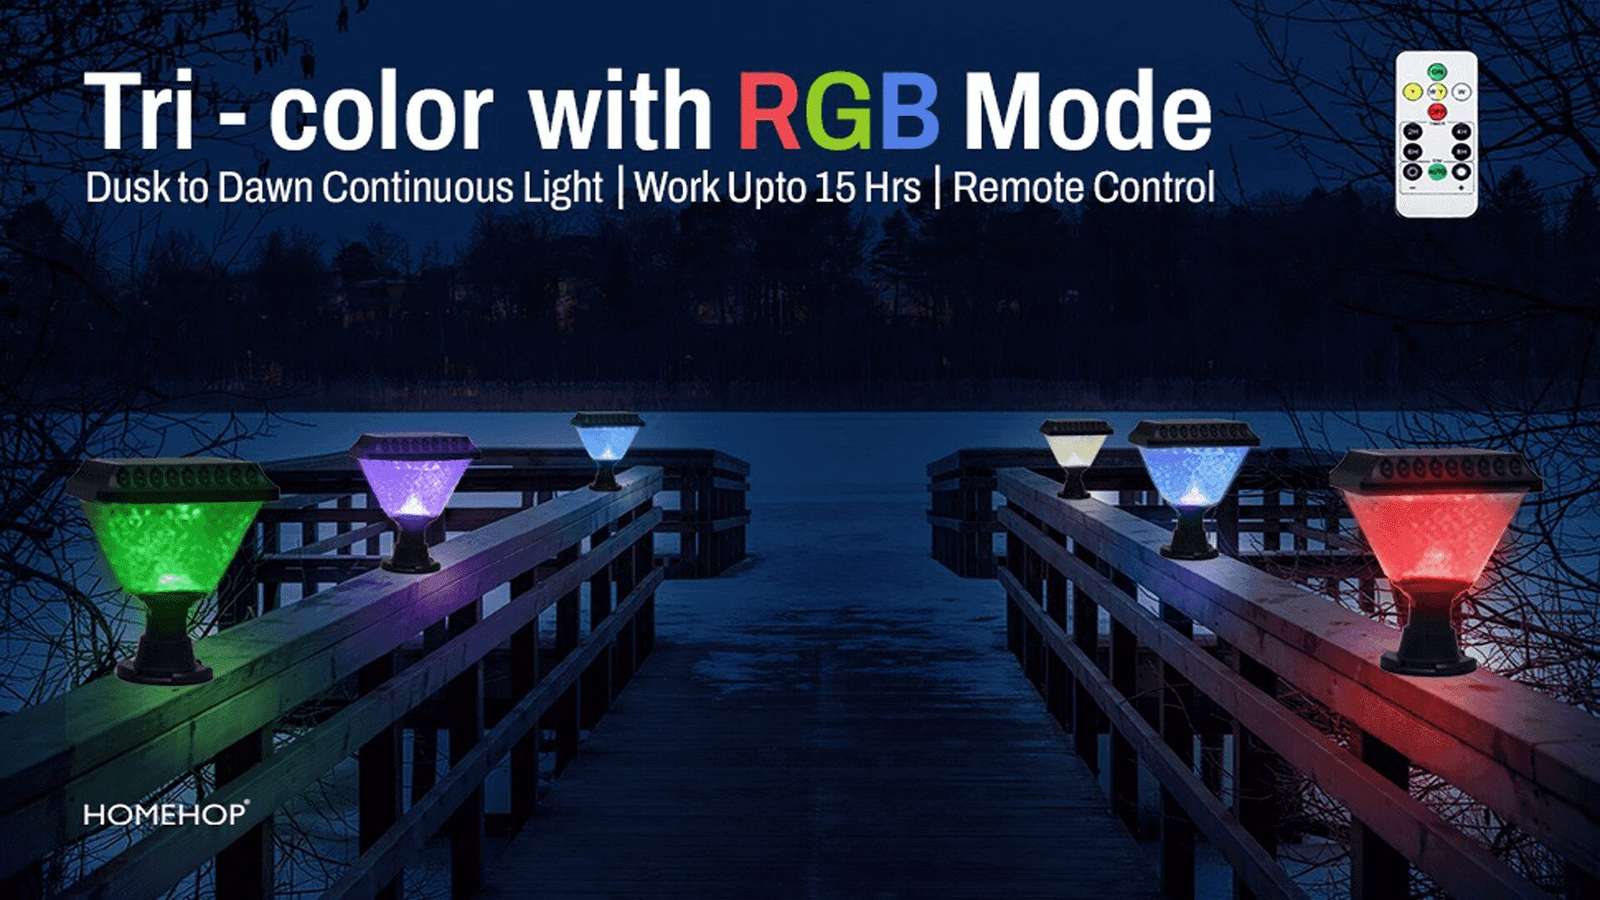 solar compound wall light with tri color rgb mode, dusk to dawn continuous light, remote control